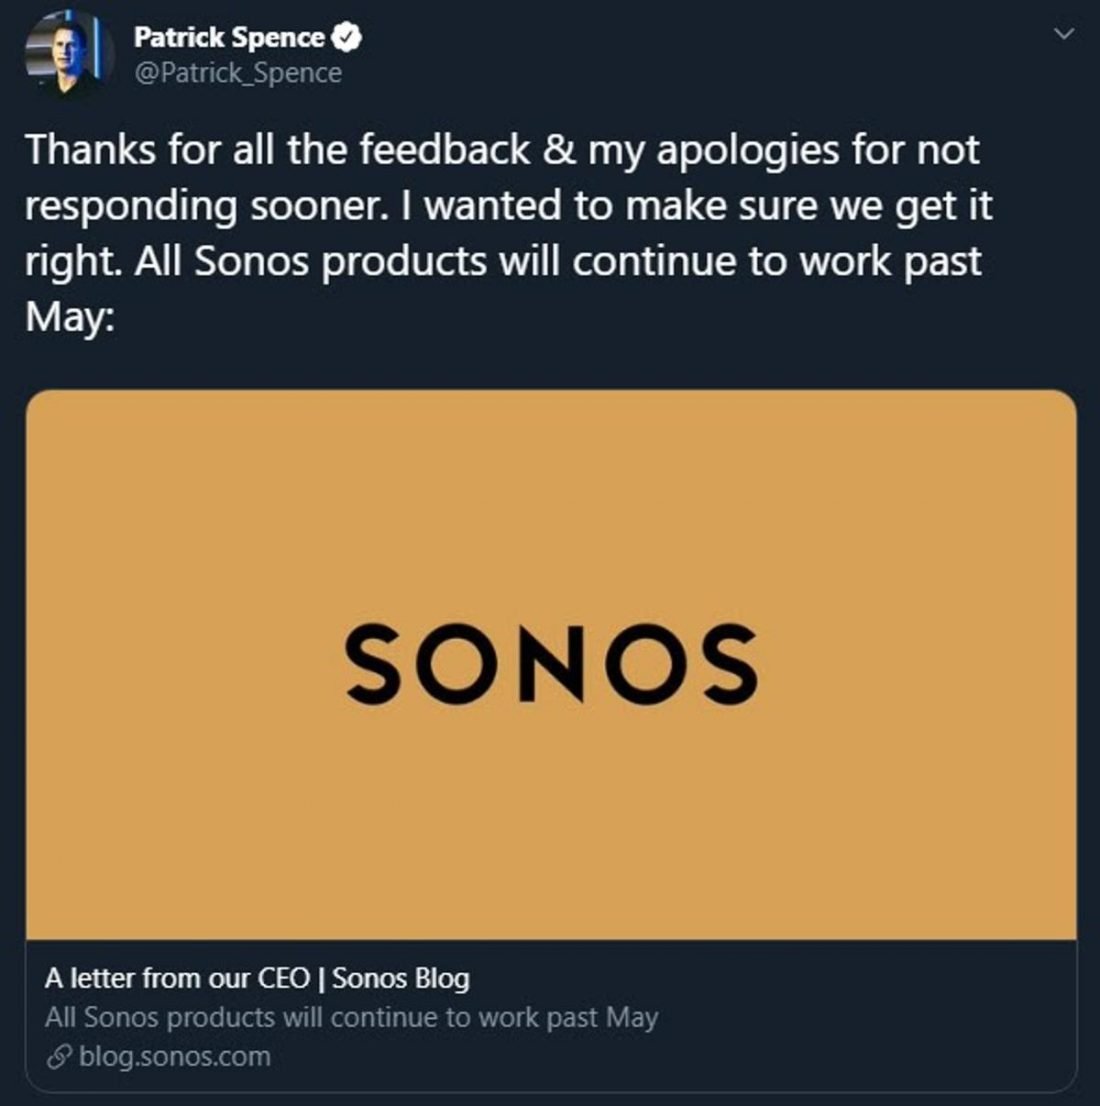 Sonos CEO Patrick Spence apologizes via Twitter (From: Twitter)